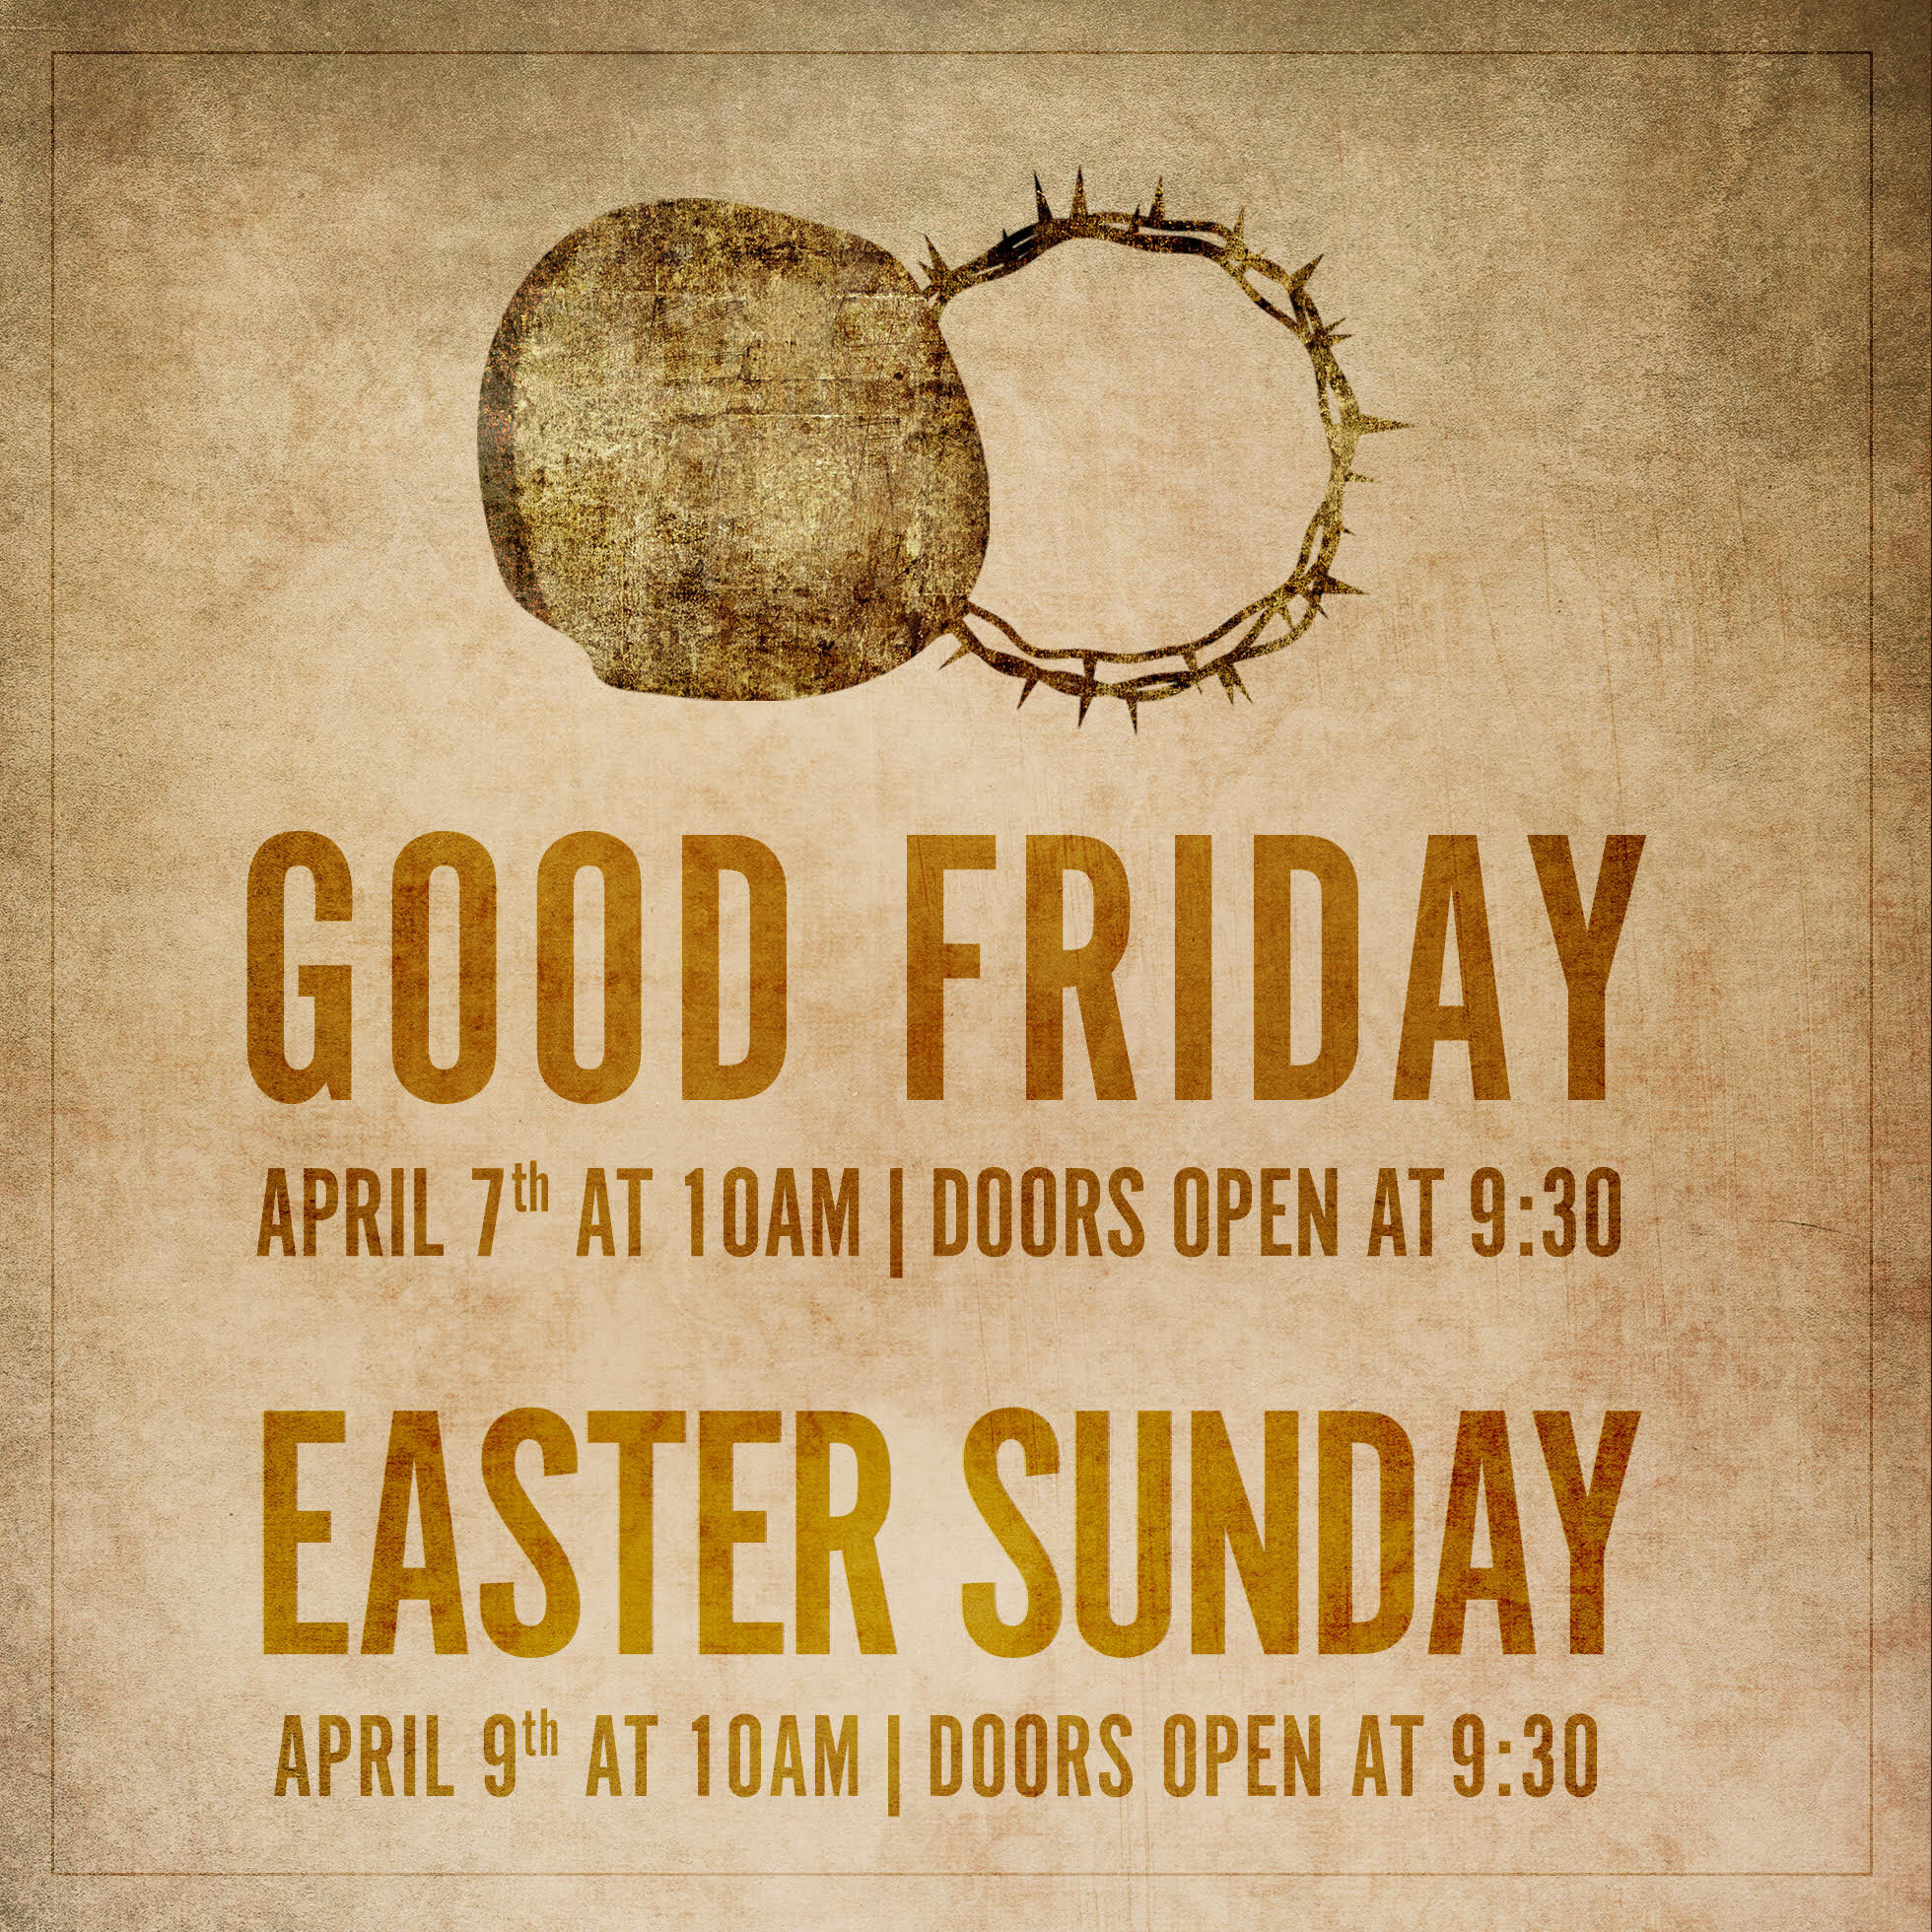 This Easter weekend Midtown Church invites you to celebrate the greatest event in the history of our planet: the death and resurrection of Jesus Christ. All are invited, the convinced and the skeptical.

Please join us for a Good Friday Gathering and